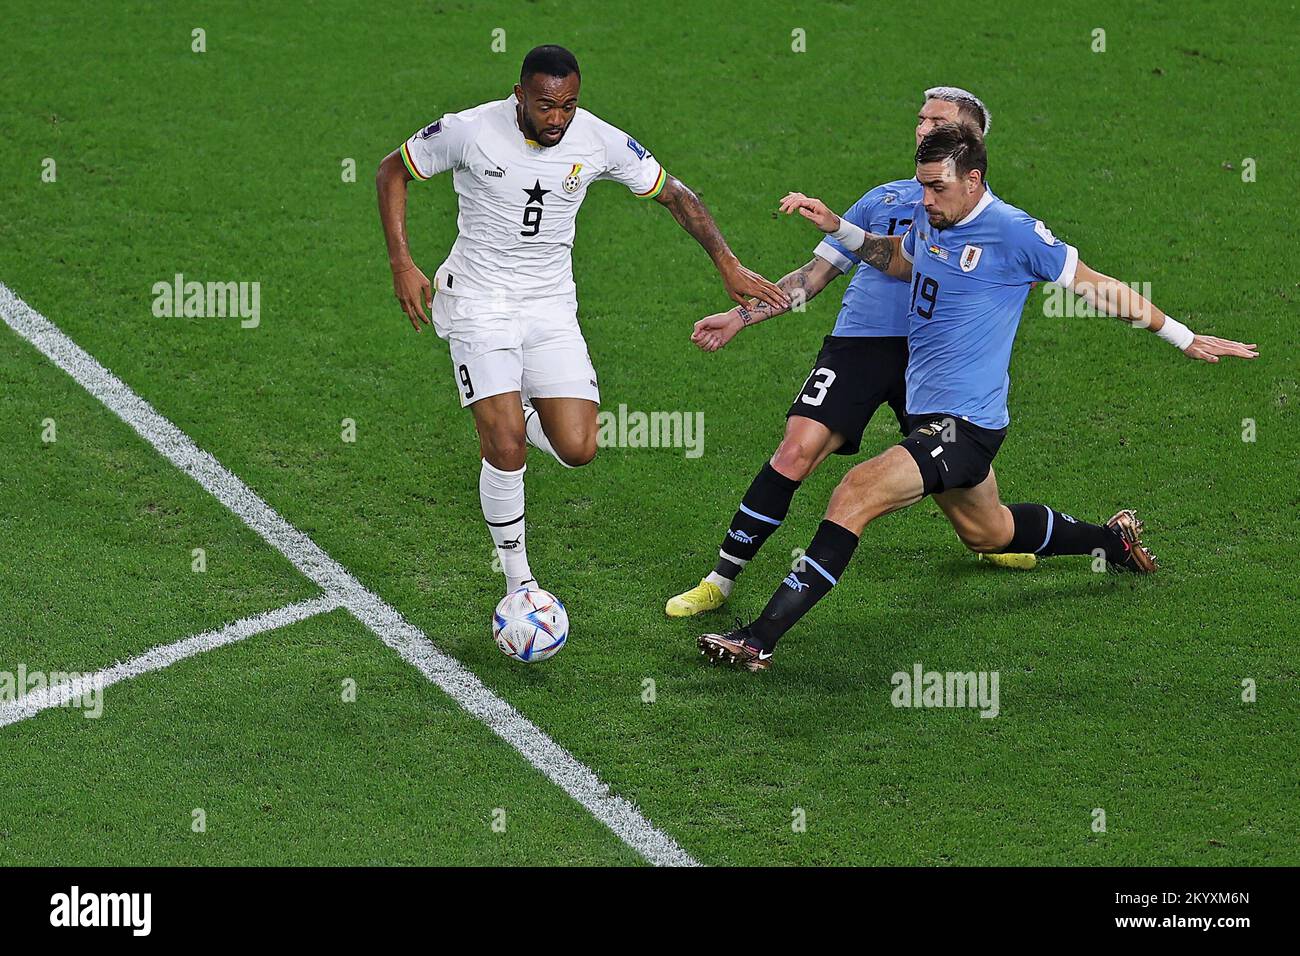 Doha, Qatar. 02nd Dec, 2022. Jordan Ayew of Ghana disputes the bid with Guillermo Varela and Sebastian Coates of Uruguay, during the match between Ghana and Uruguay, for the 3rd round of Group H of the FIFA World Cup Qatar 2022, Al Janoub Stadium this Friday 02. 30761 (Heuler Andrey/SPP) Credit: SPP Sport Press Photo. /Alamy Live News Stock Photo